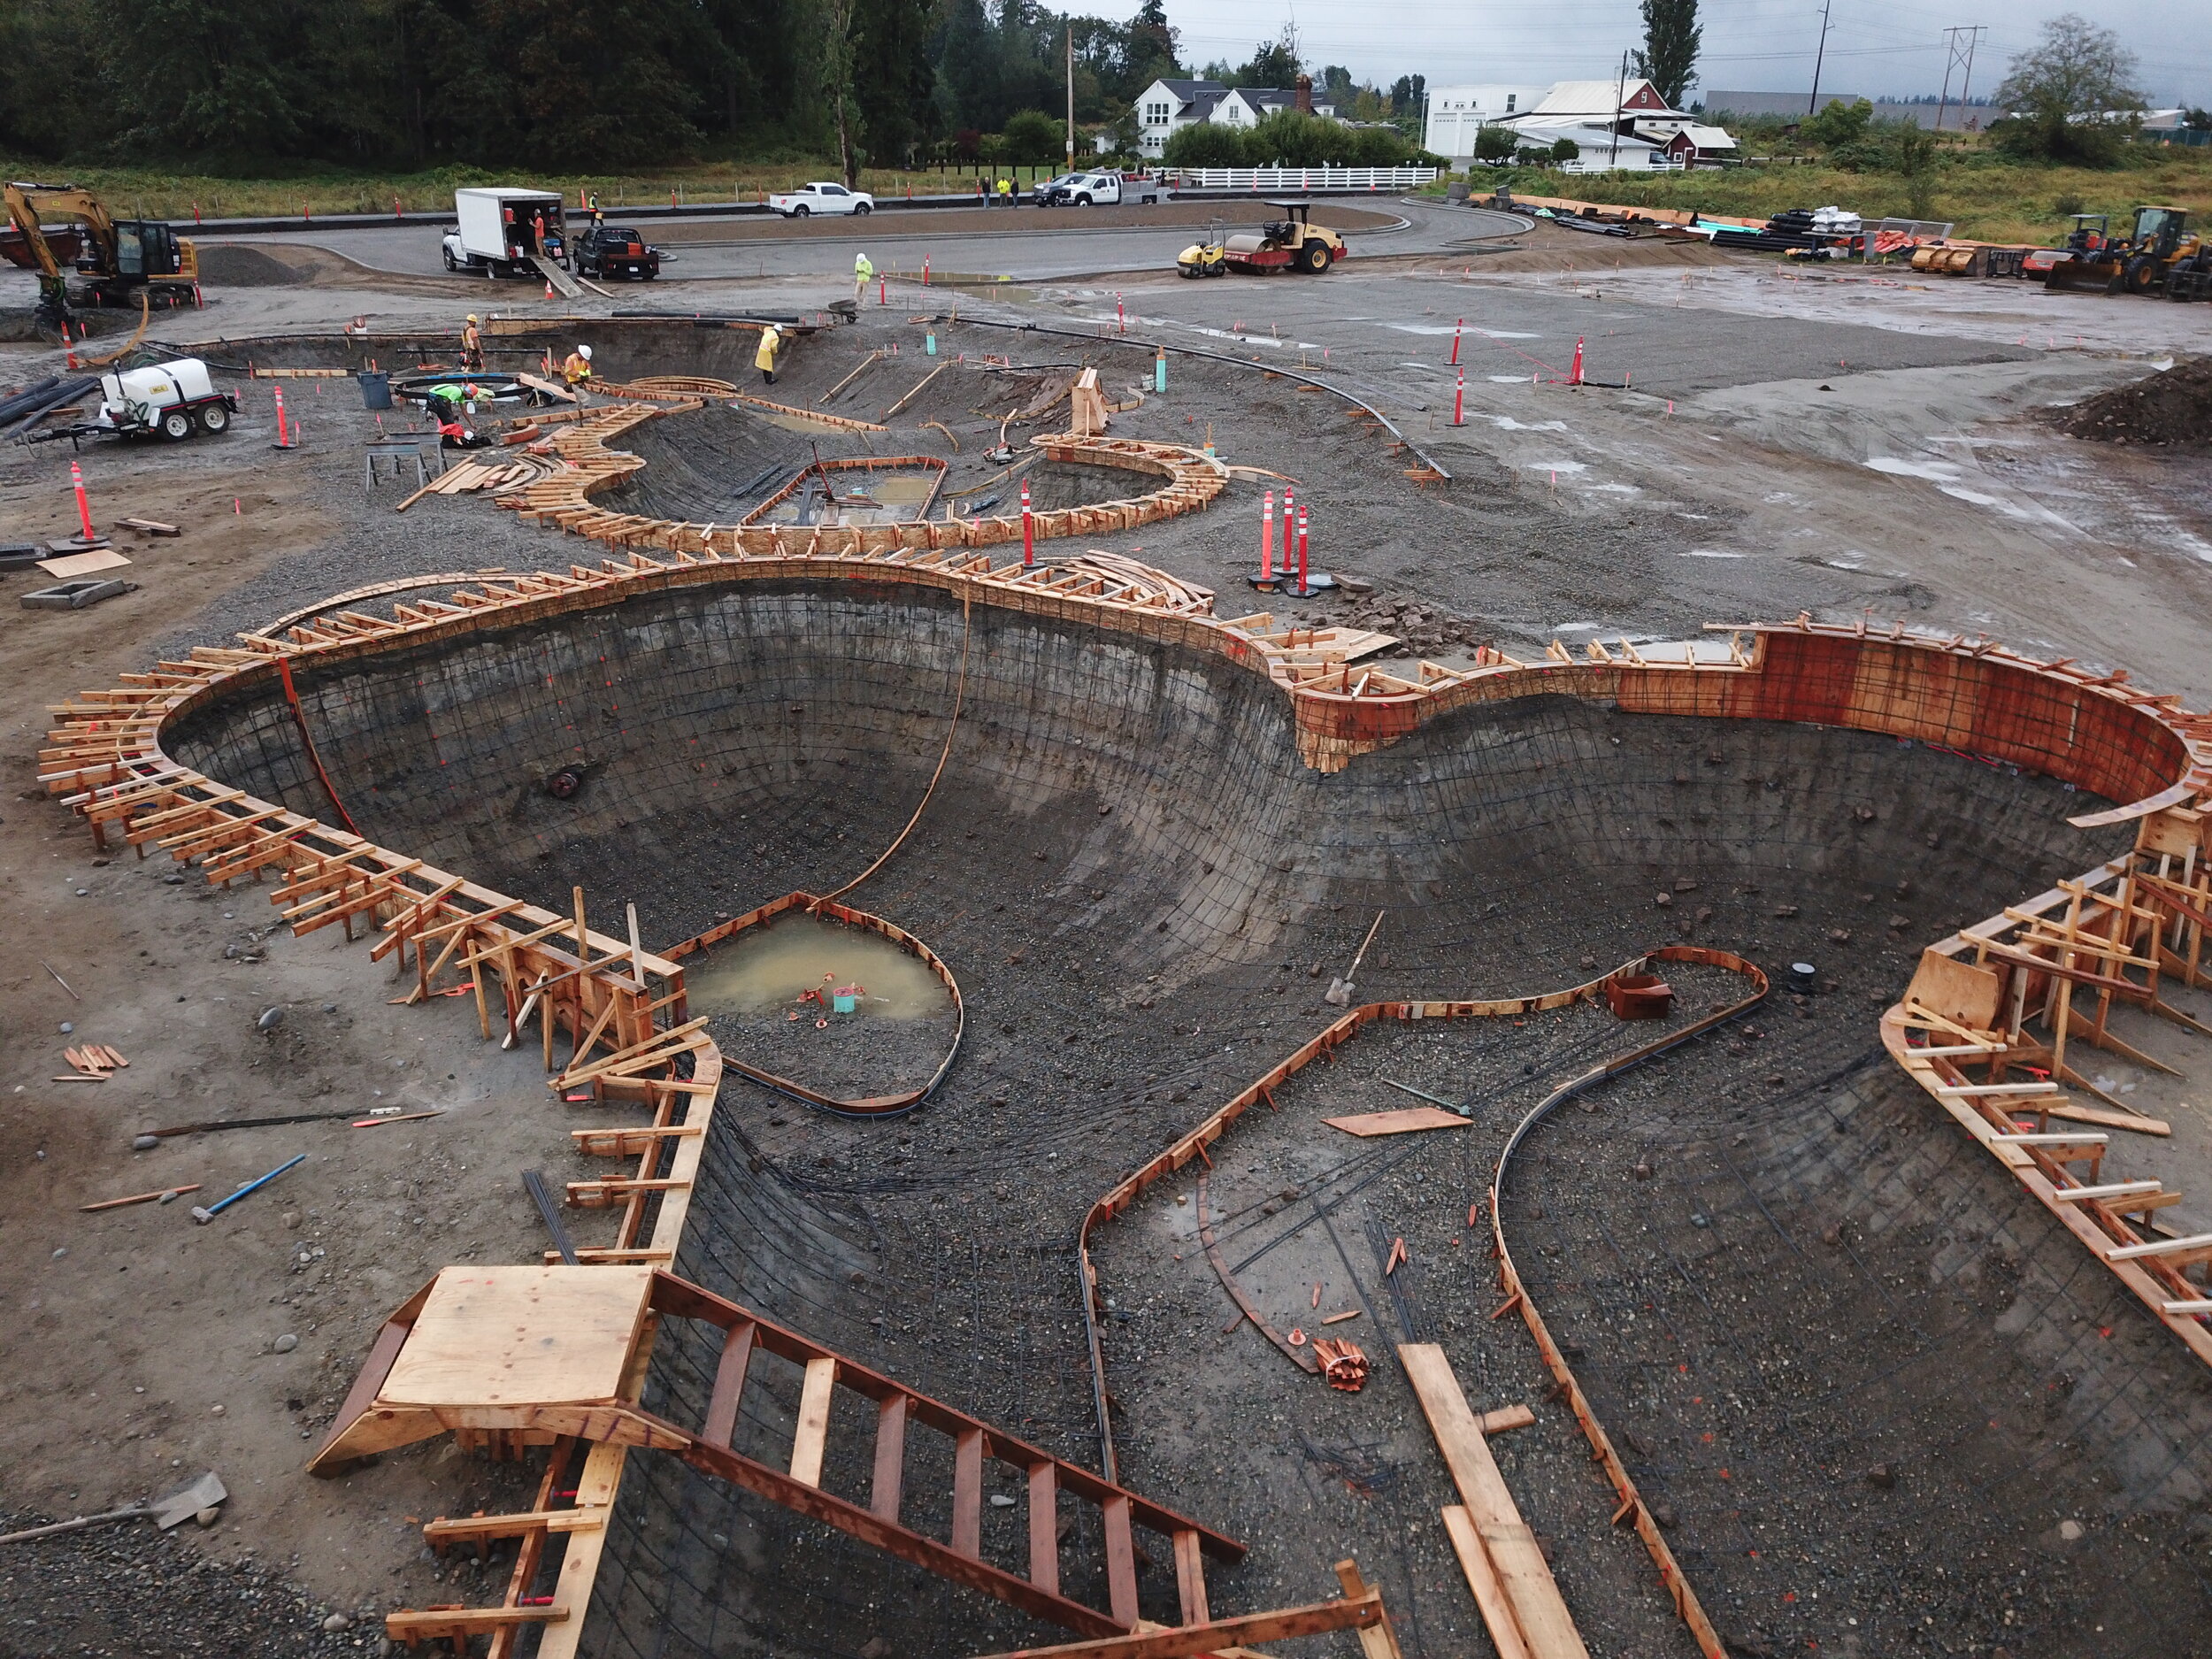 The bowl section is coming together in Lake Stevens, Washington 💪🏽 A large vert bowl with pool coping &amp; a flow bowl too